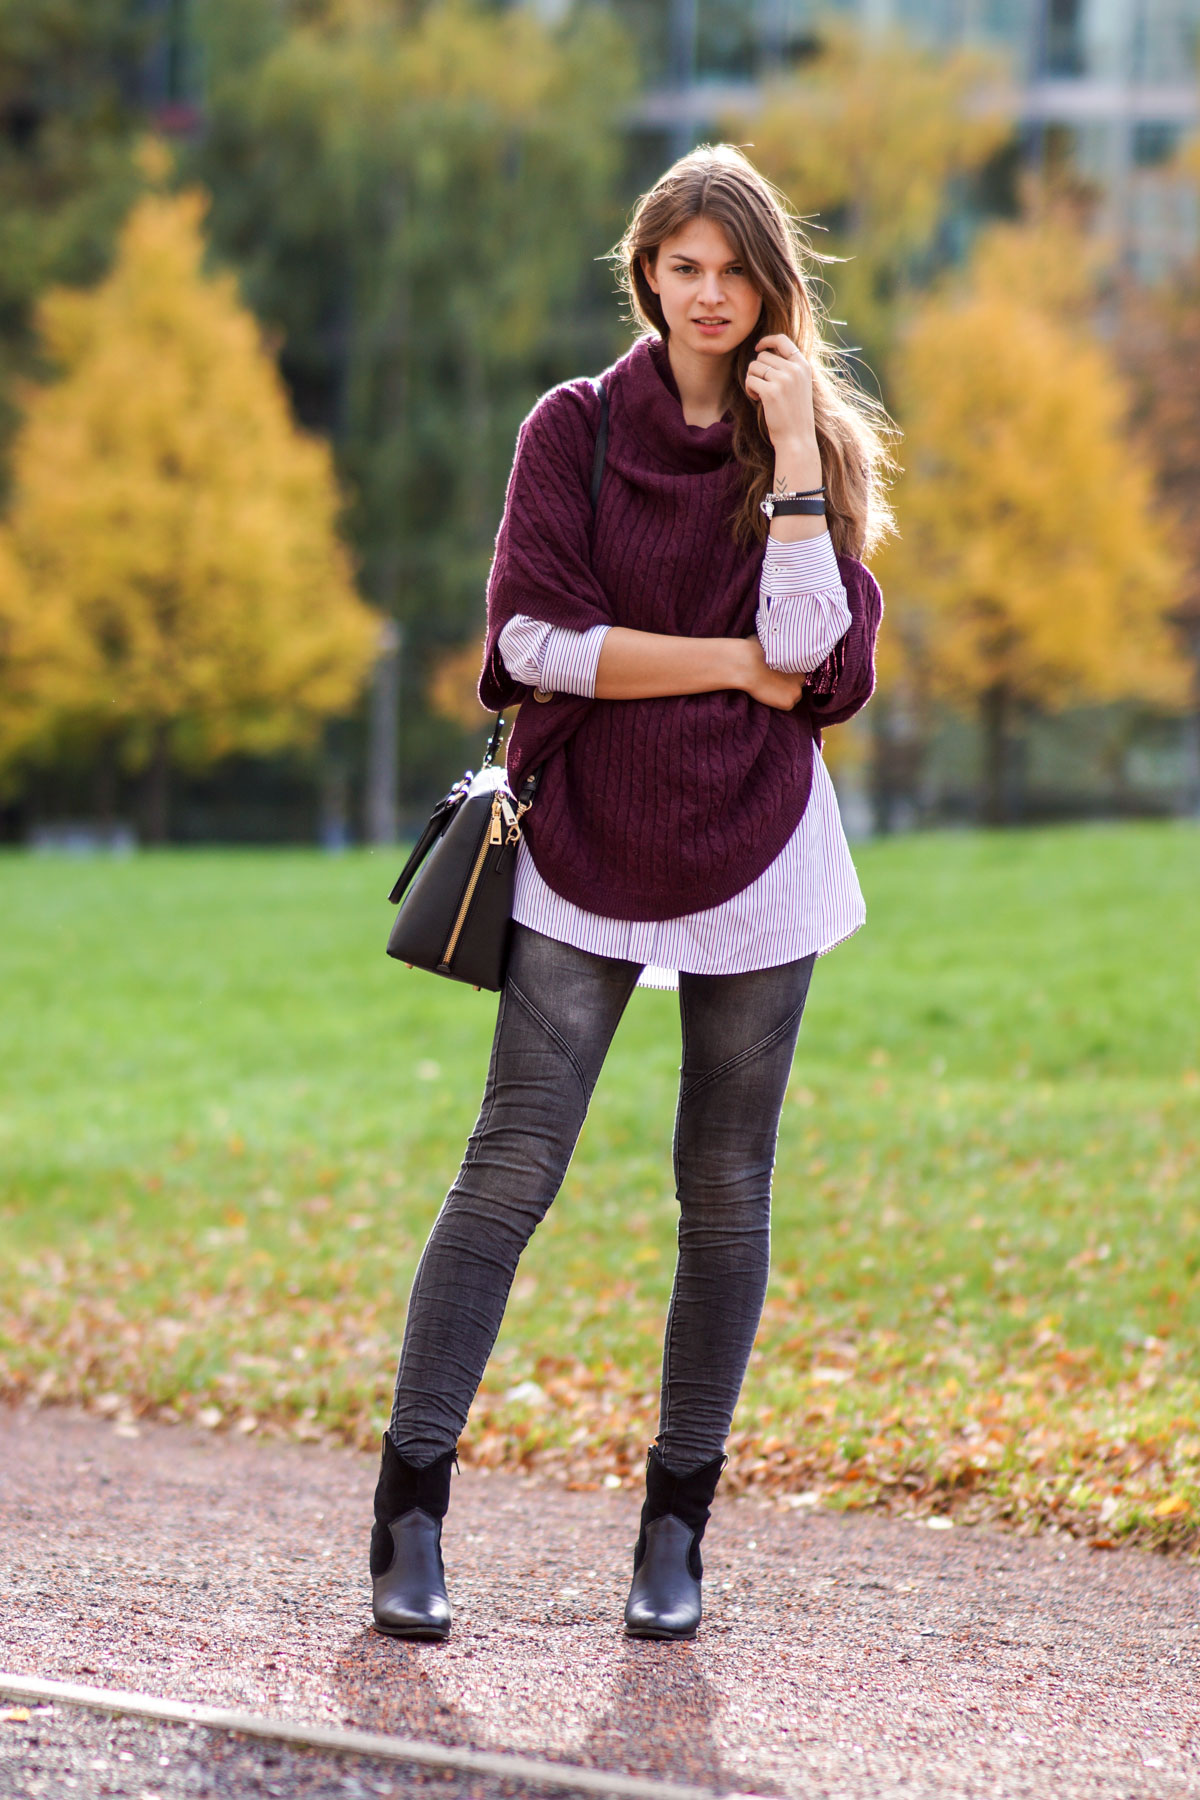 #OwnTheSeason with Autumn Outfits from TK Maxx